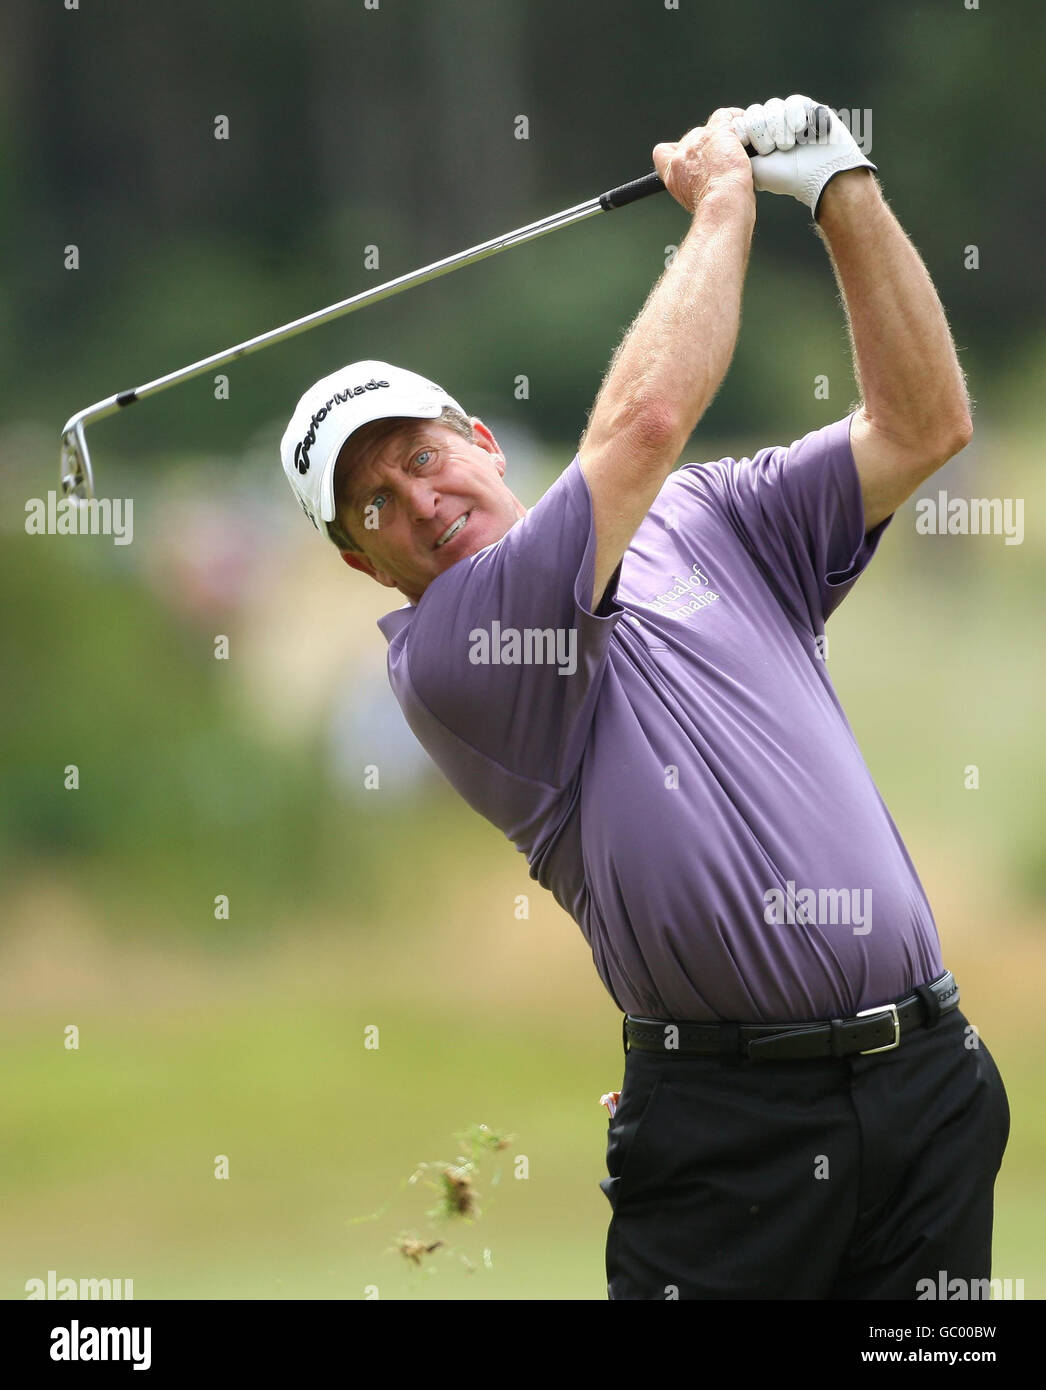 USA's Fred Funk hits an eagle on the 18th hole, to finish in the lead at 11 under par during Round Two of the Mastercard Senior Open at Sunningdale Golf Club, Berkshire. Stock Photo